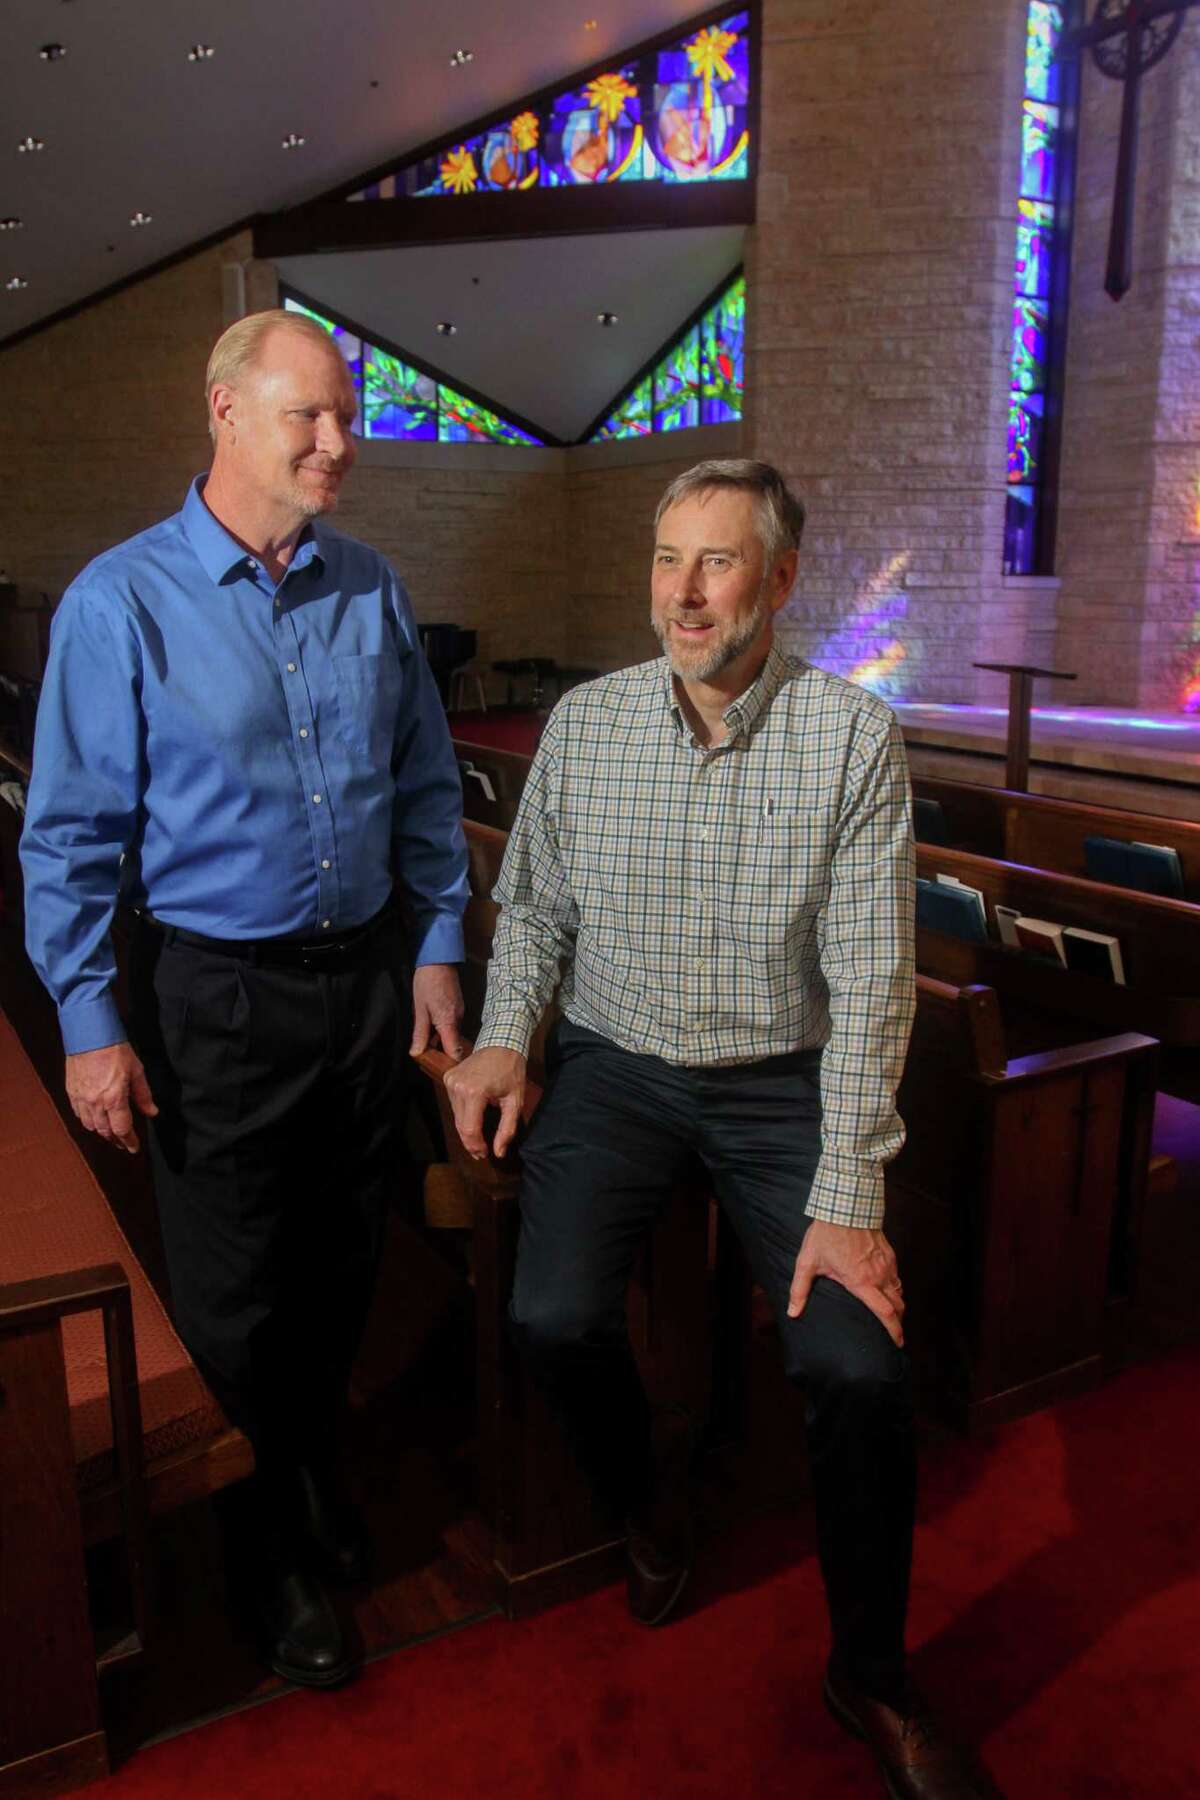 Pastor Alf Halvorson, left, and Chuck Fox at Memorial Drive Presbyterian Church. Eleven years ago, Chuck Fox created an opportunity to give back on Black Friday, rather than consume. And Bless Friday was born. This year, church members will be in the community with in-person initiatives with Houston Food Bank and Open Door Mission.